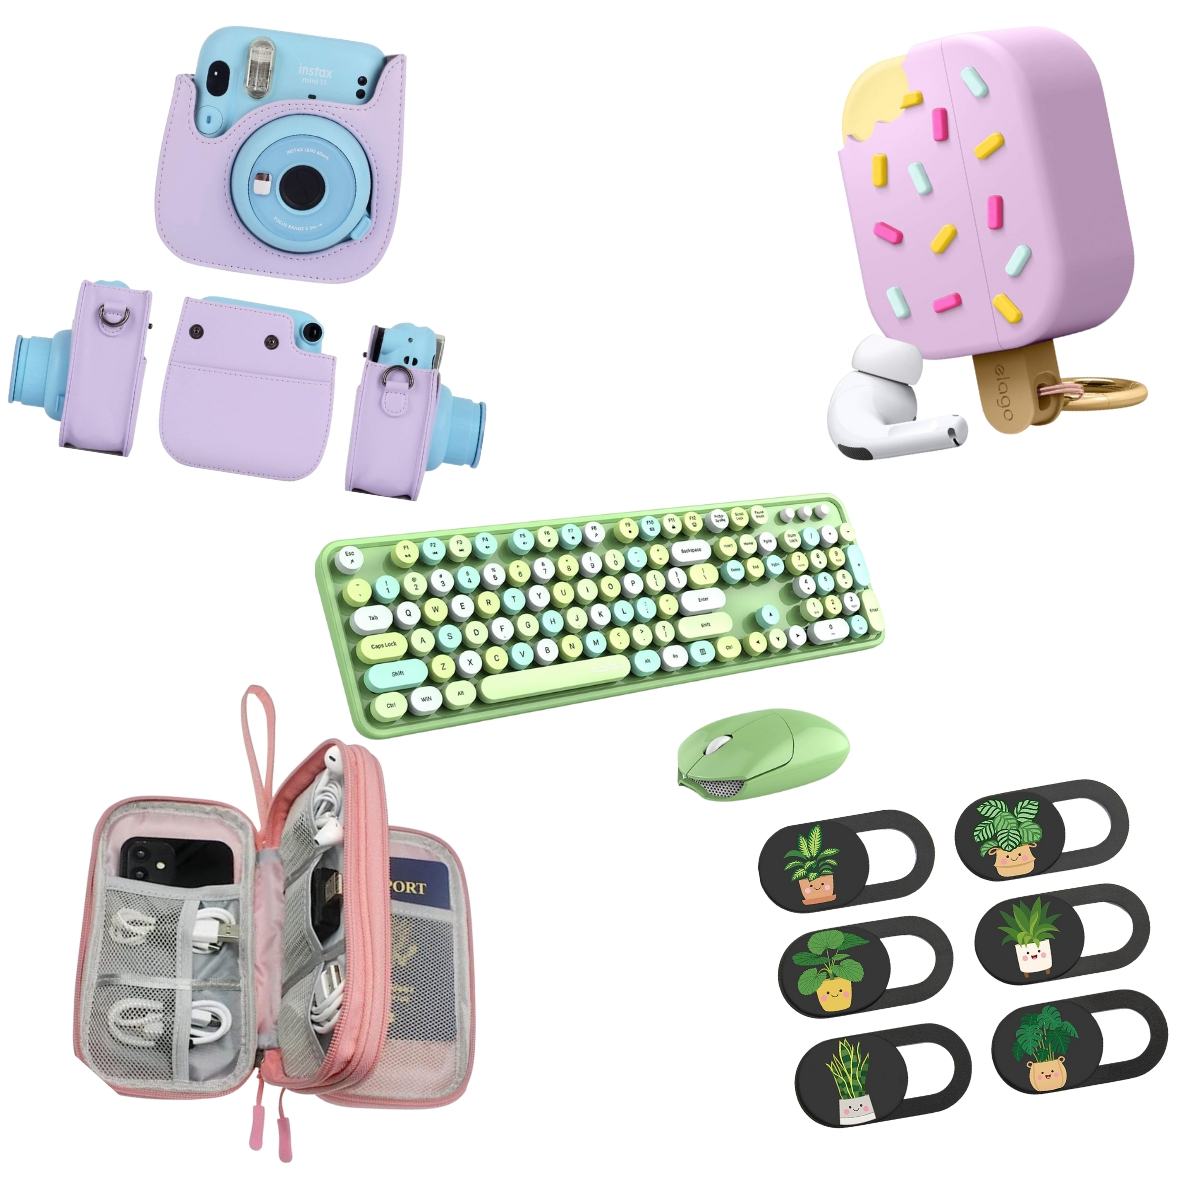 Check Out 17 Cute Tech Accessories from Amazon as Low as $7